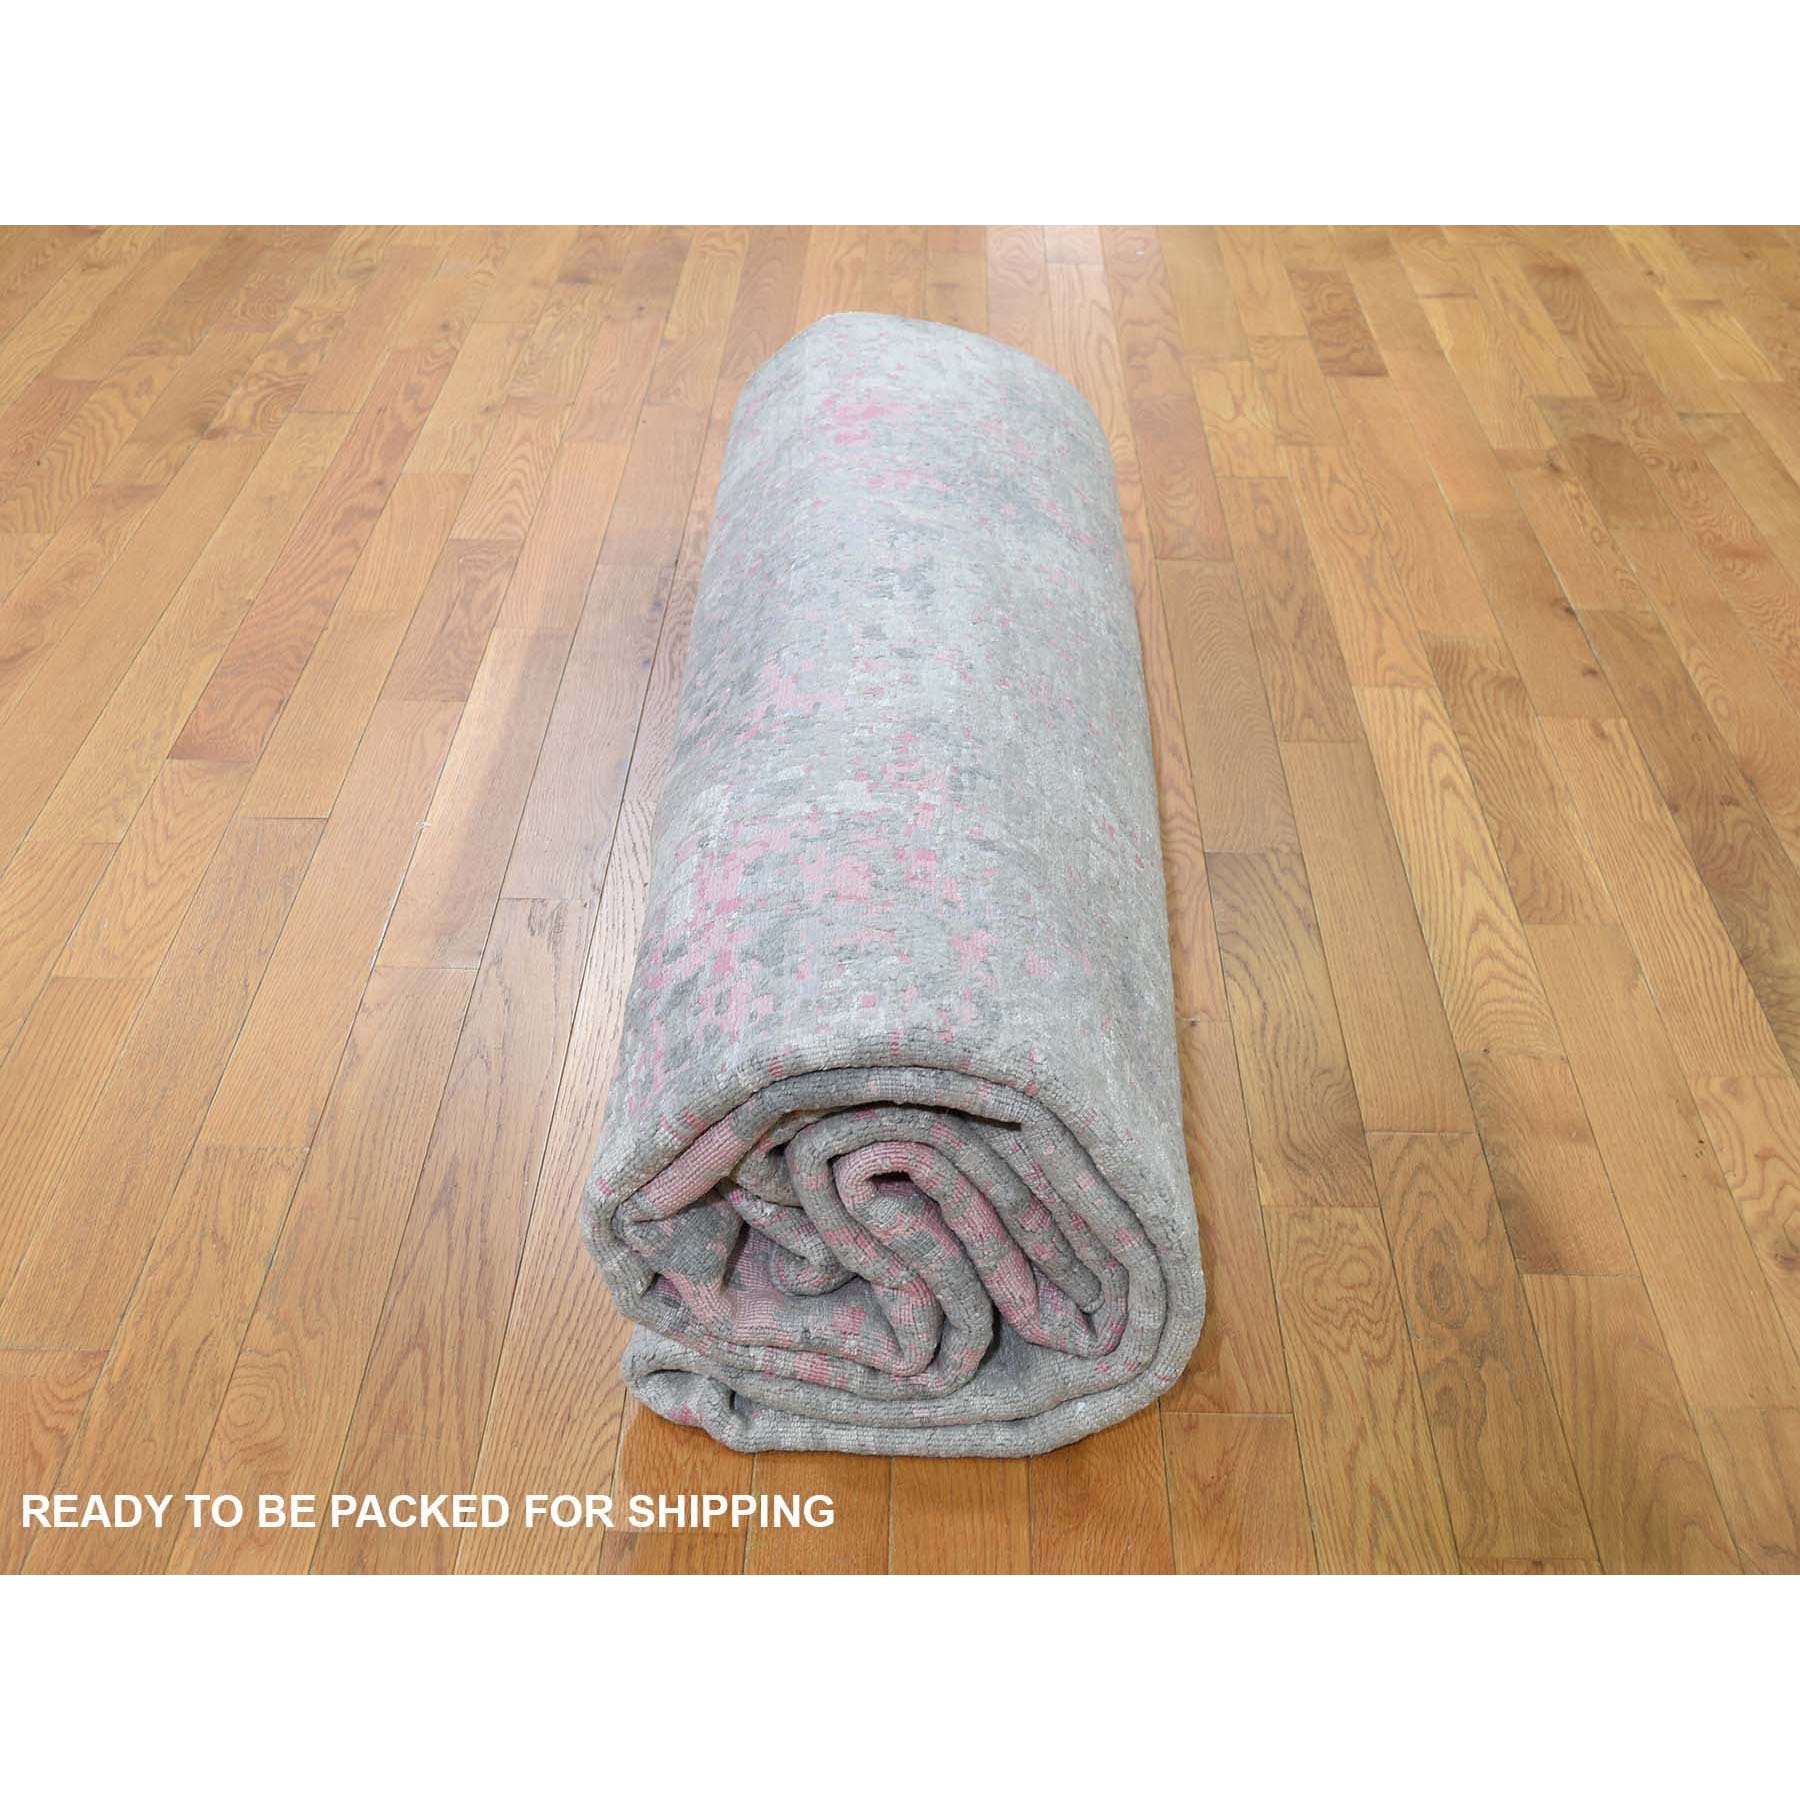 9-x12- Pink Hi-Low Pile Abstract Design Wool And Silk Hand Knotted Oriental Rug 